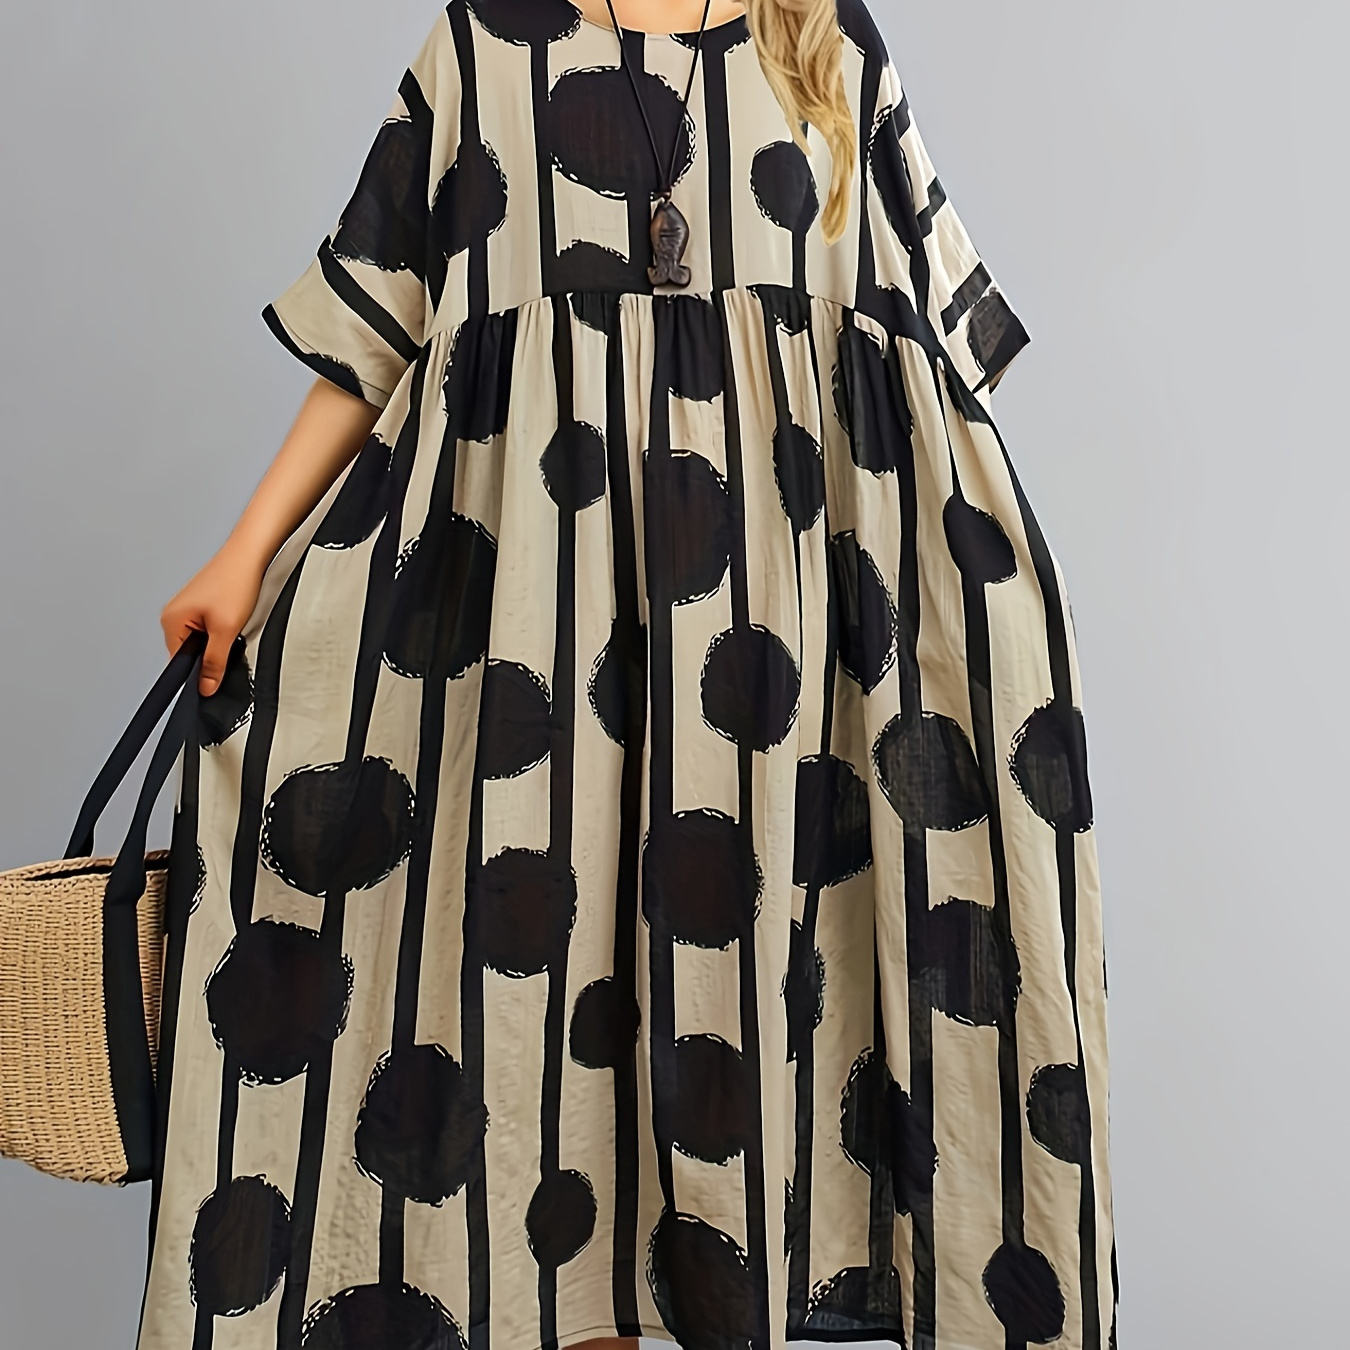 

Plus Size Polka Dot & Line Print Loose Dress, Casual 3/4 Hort Sleeve Dress For Spring & Summer, Women's Plus Size Clothing